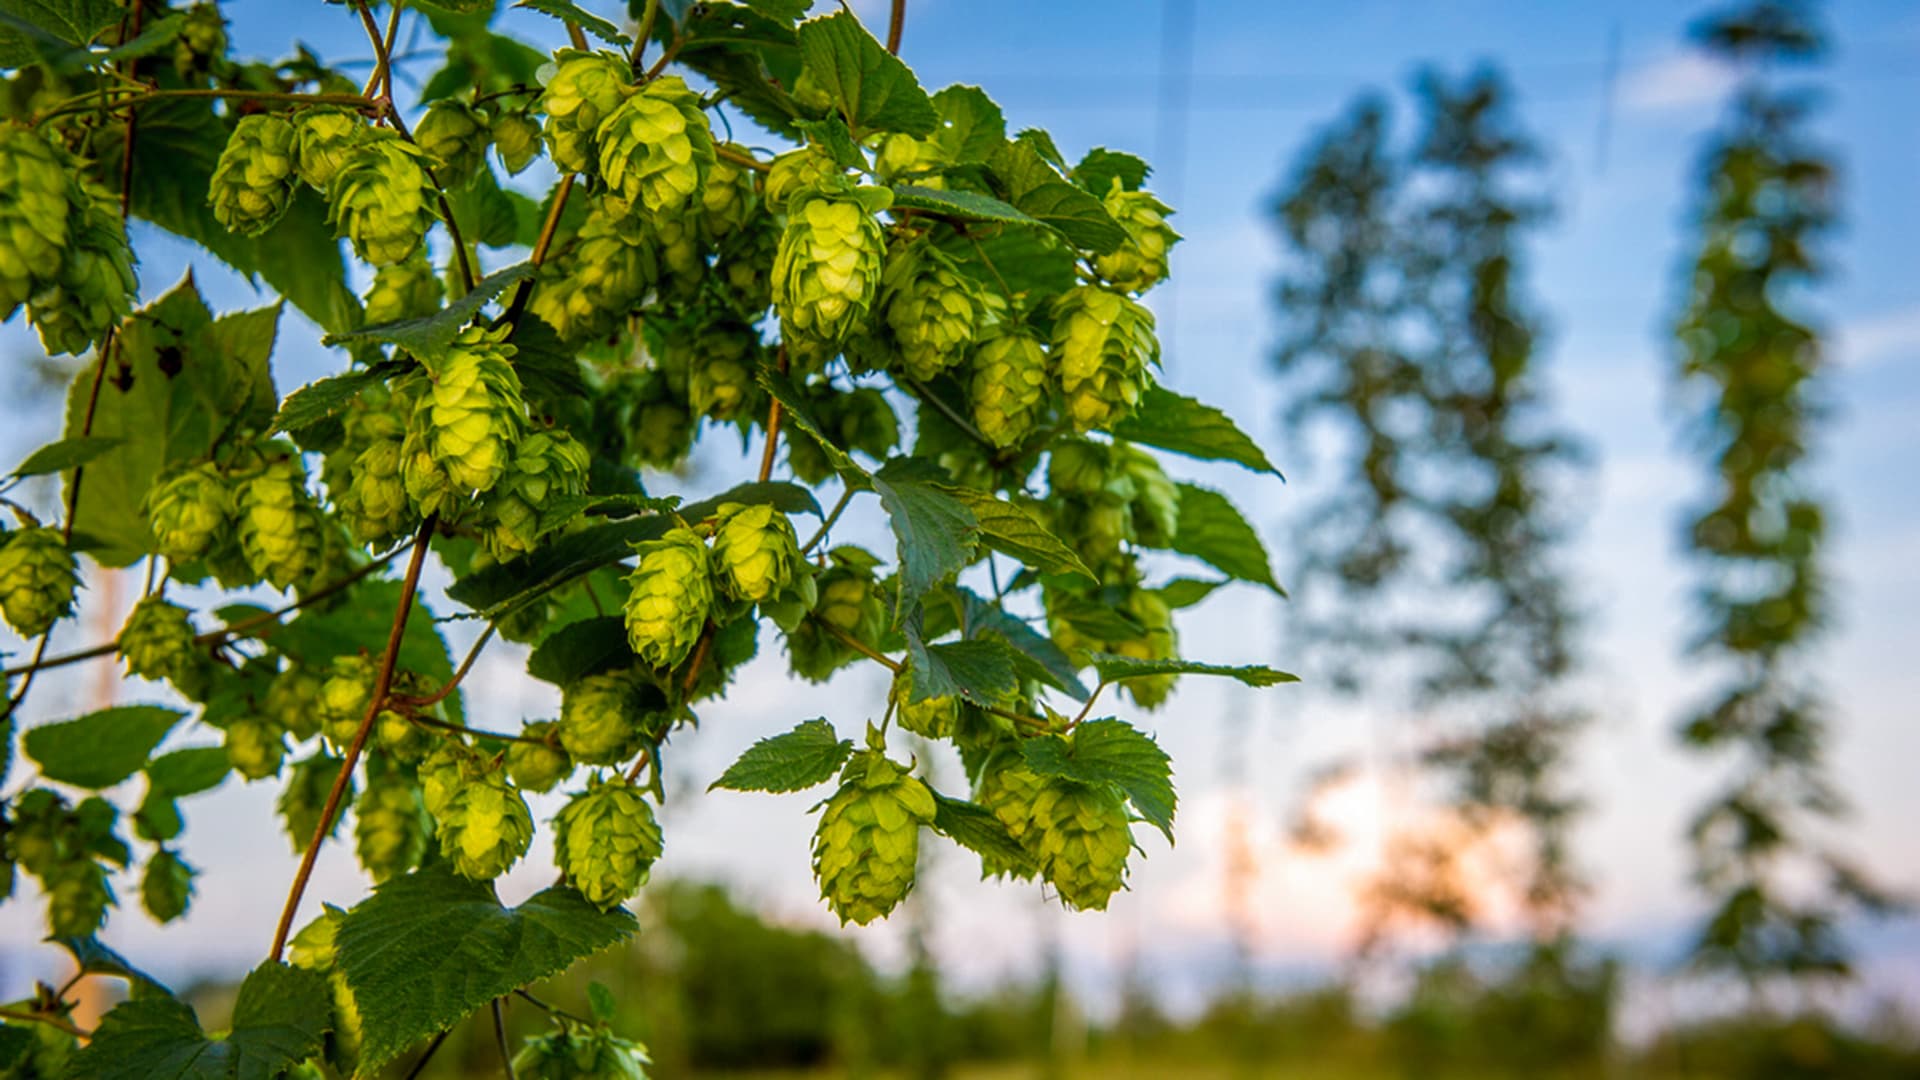 Hops production at the Western Maryland Research and Education Center